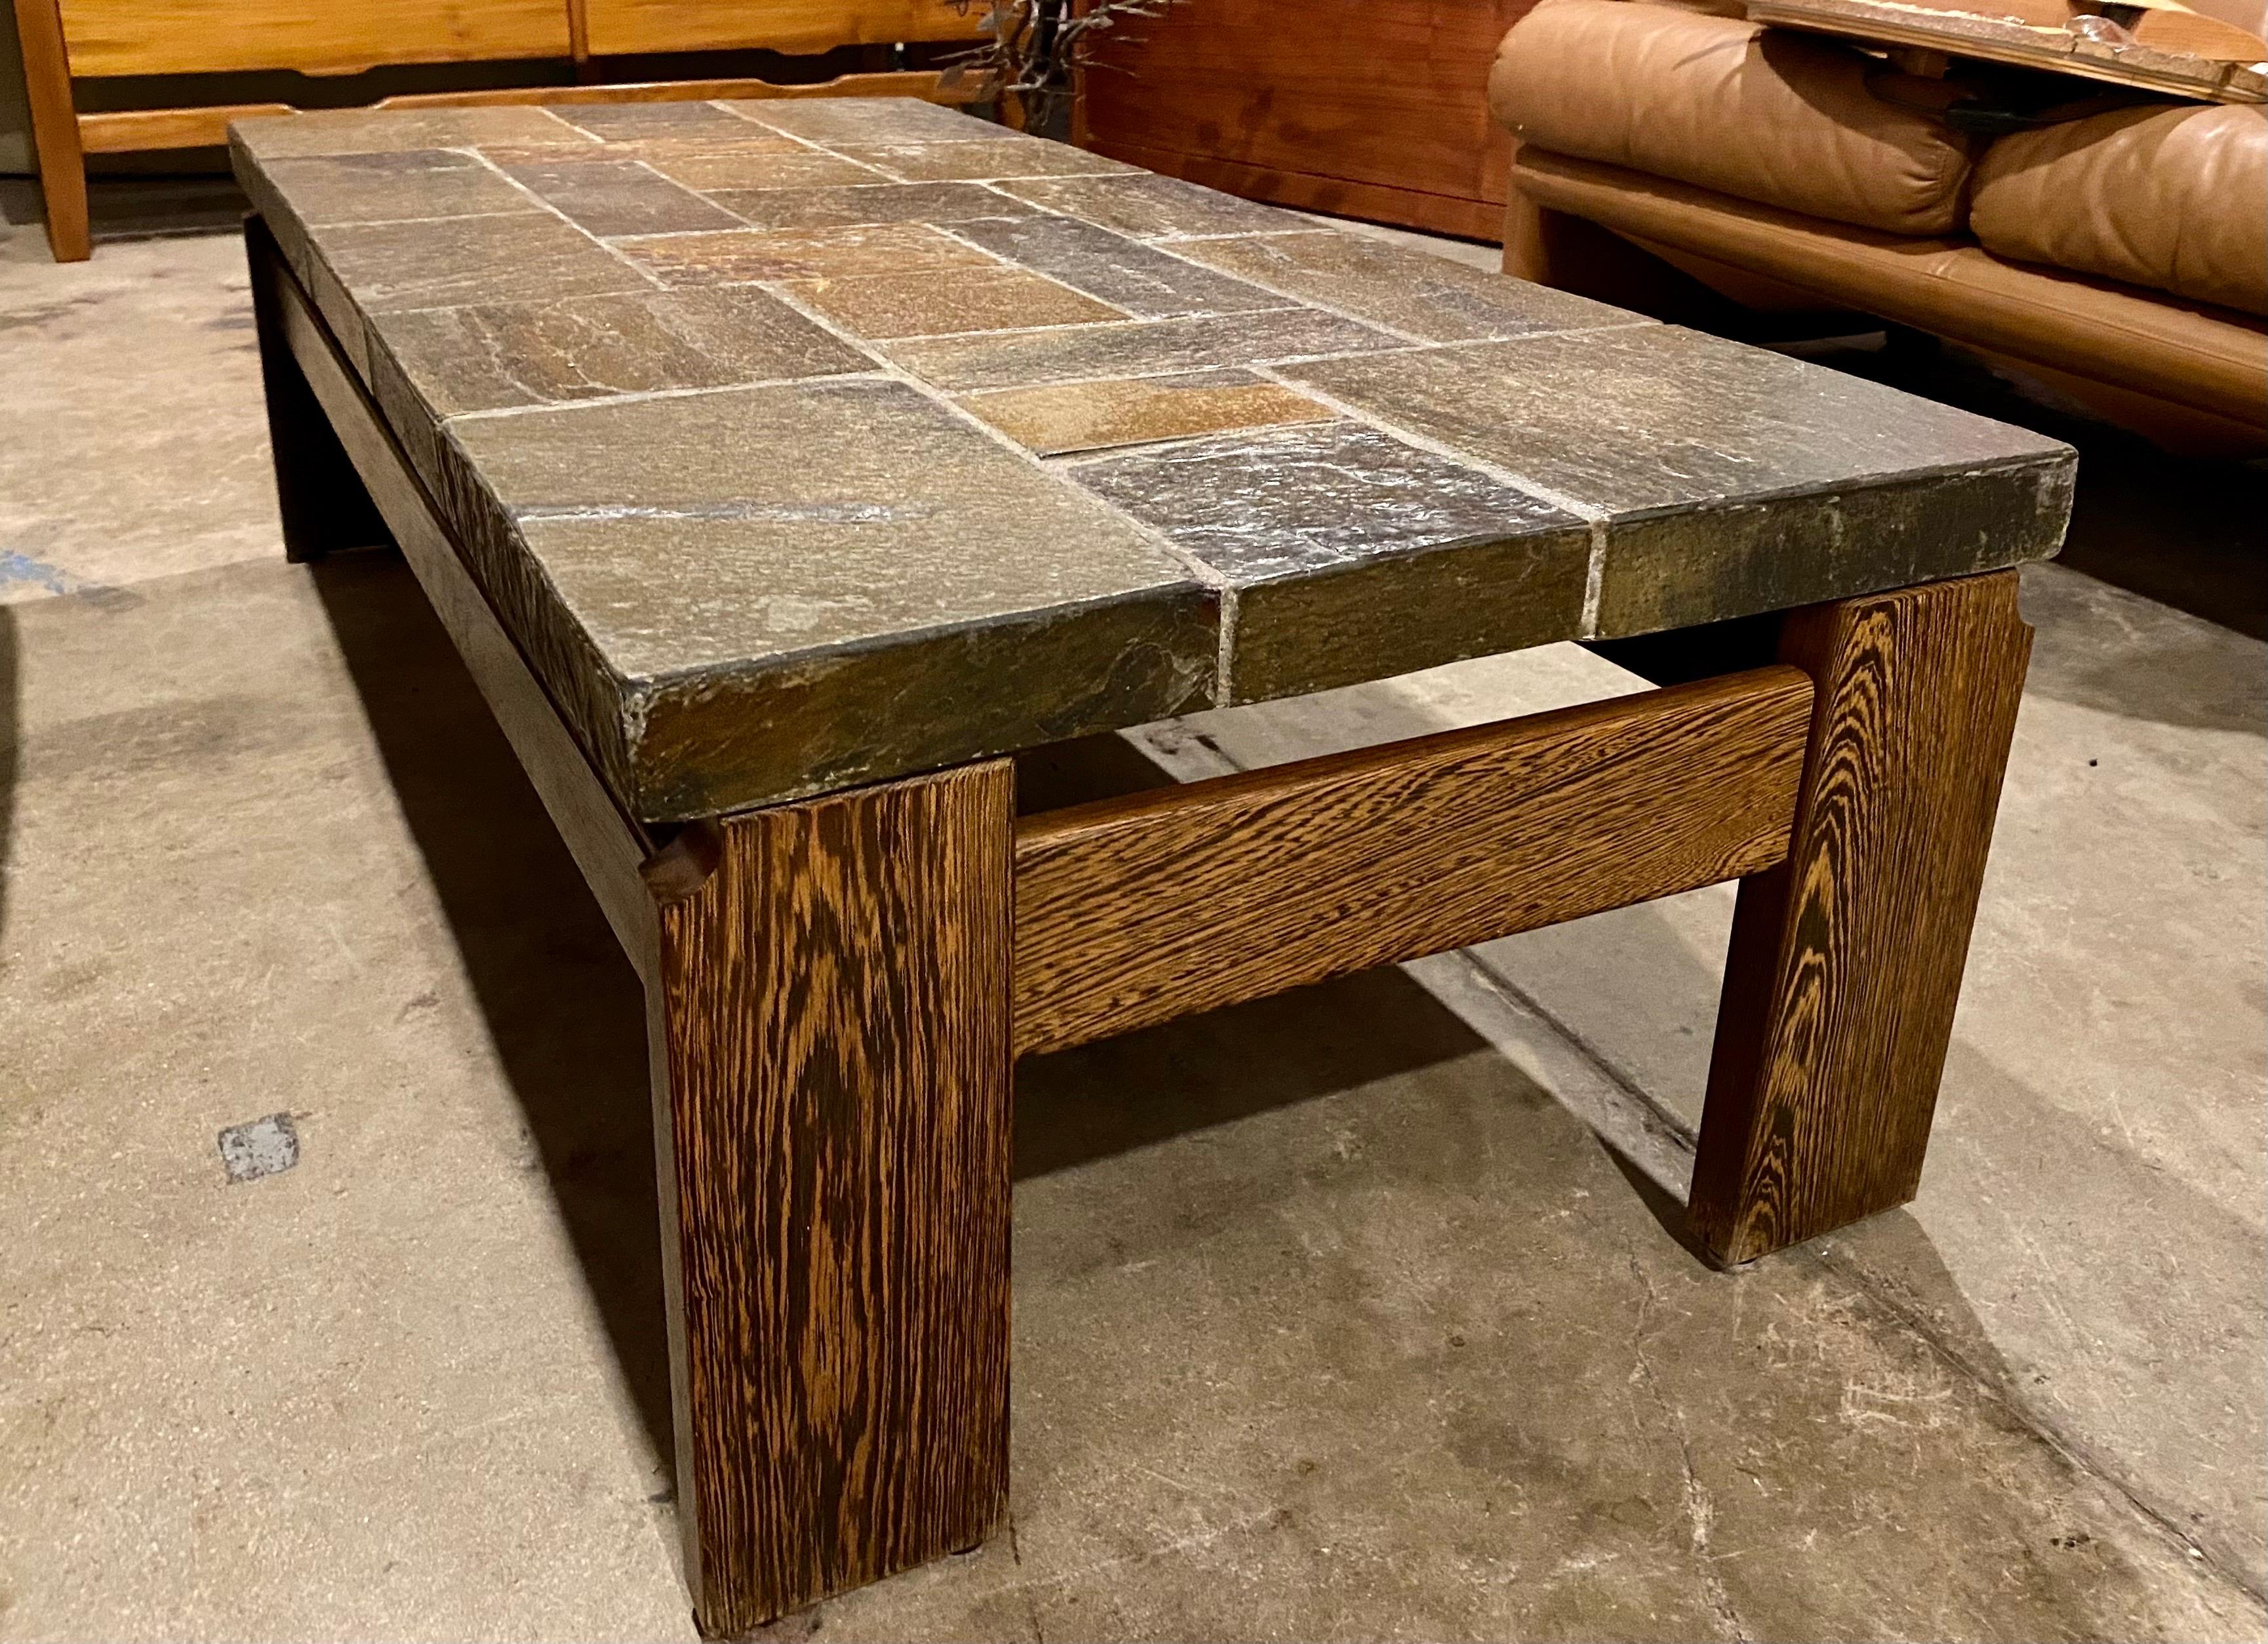 Vintage slate top coffee table with a wood base made of wenge, Belgium, circa 1970s. This vintage brutalist coffee table is very heavy, sturdy and in good overall condition. 
Dimensions: 51.25